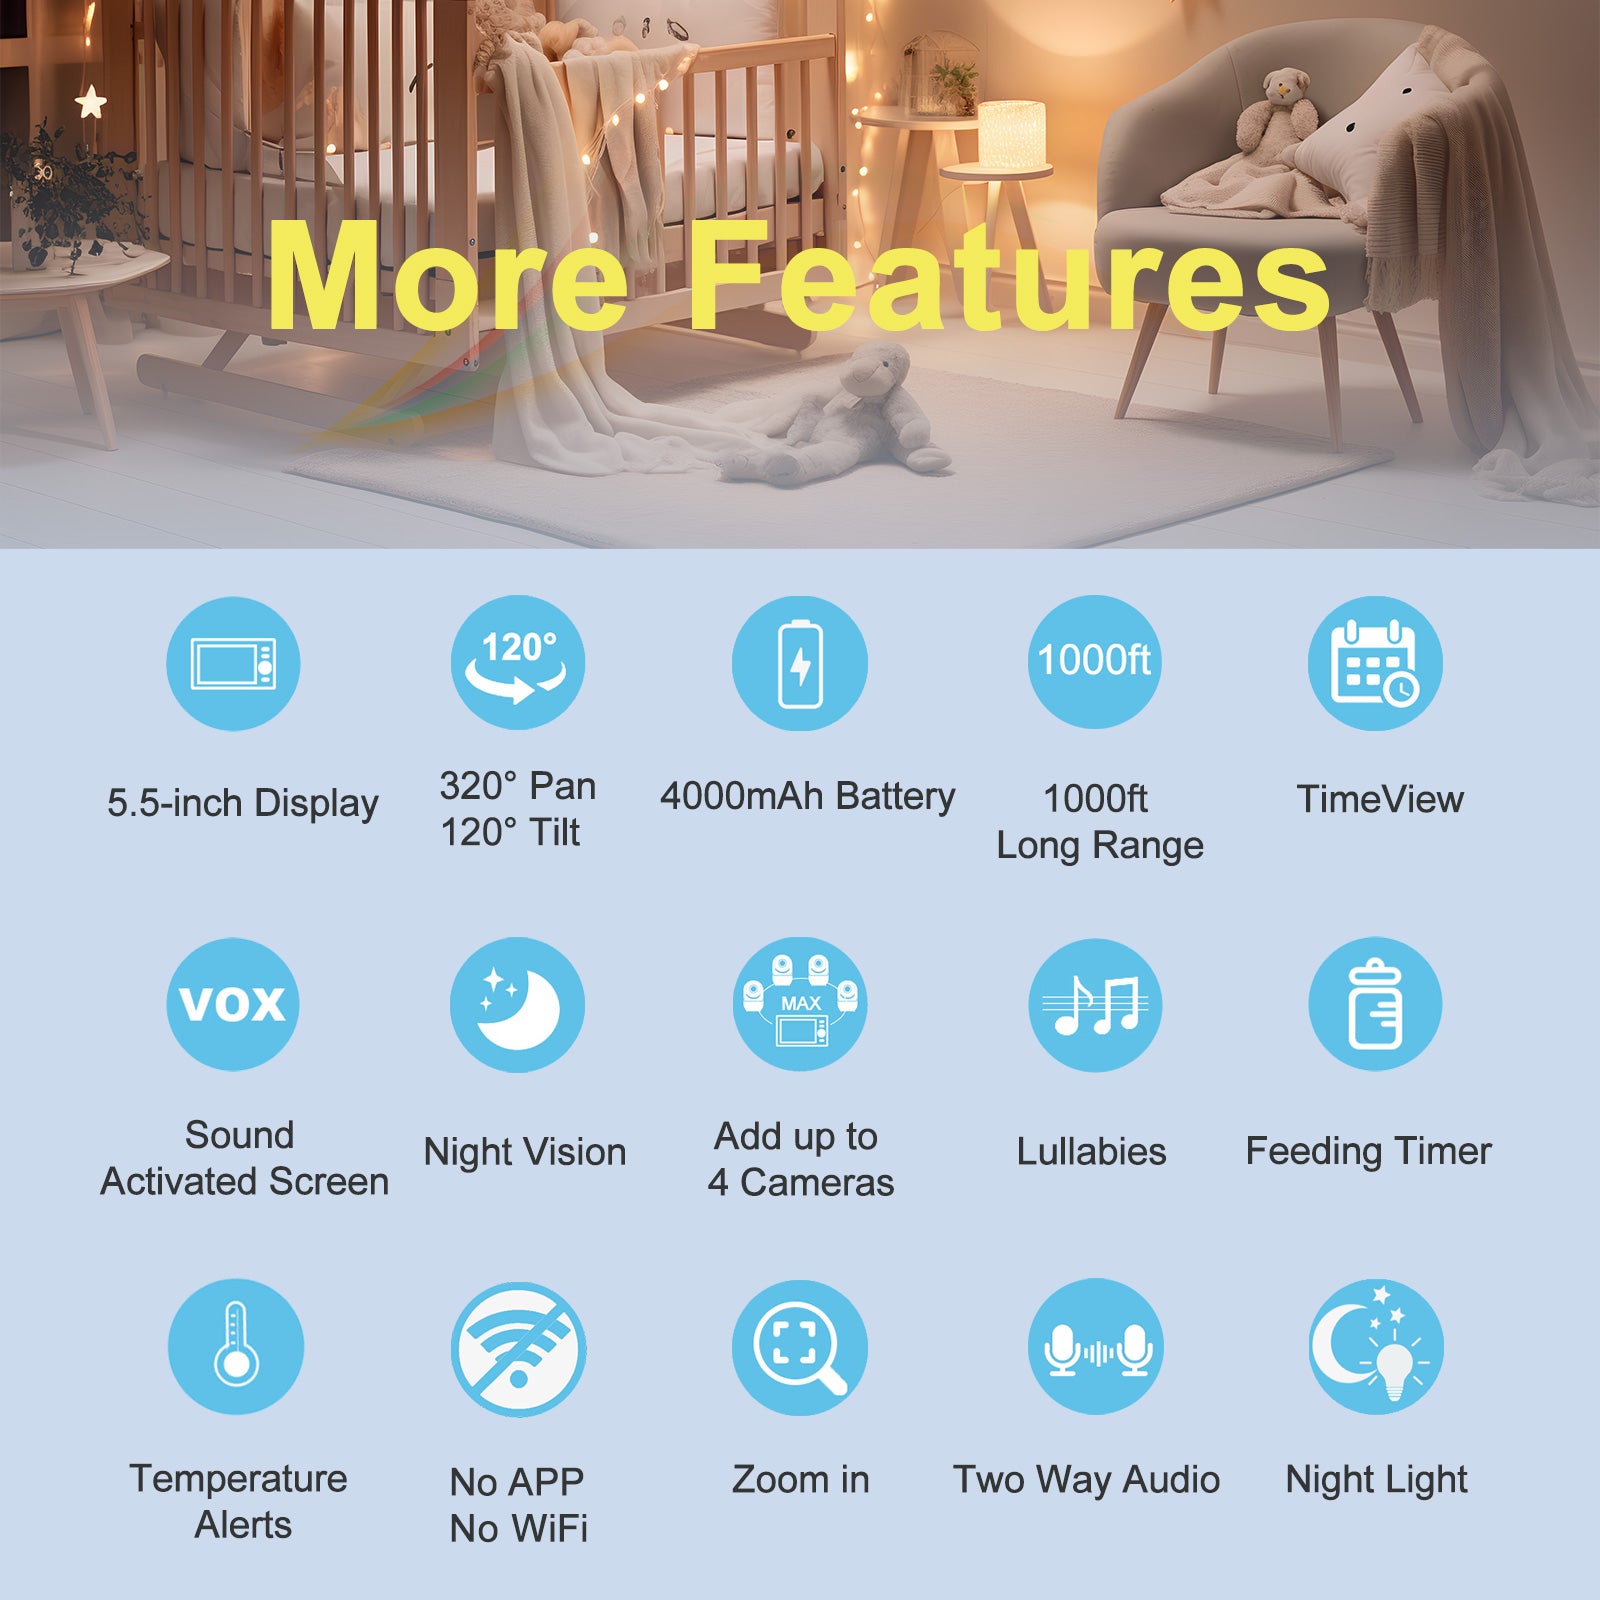 hellobaby best baby monitor - HelloBaby 720P 5.5'' HD Video Baby Monitor No WiFi, Remote Pan Tilt Zoom Baby Monitor with Camera and Audio Wide View Range, Night Light, Hack Proof, 4000mAh Battery, Time&Clock, 1080p Camera  